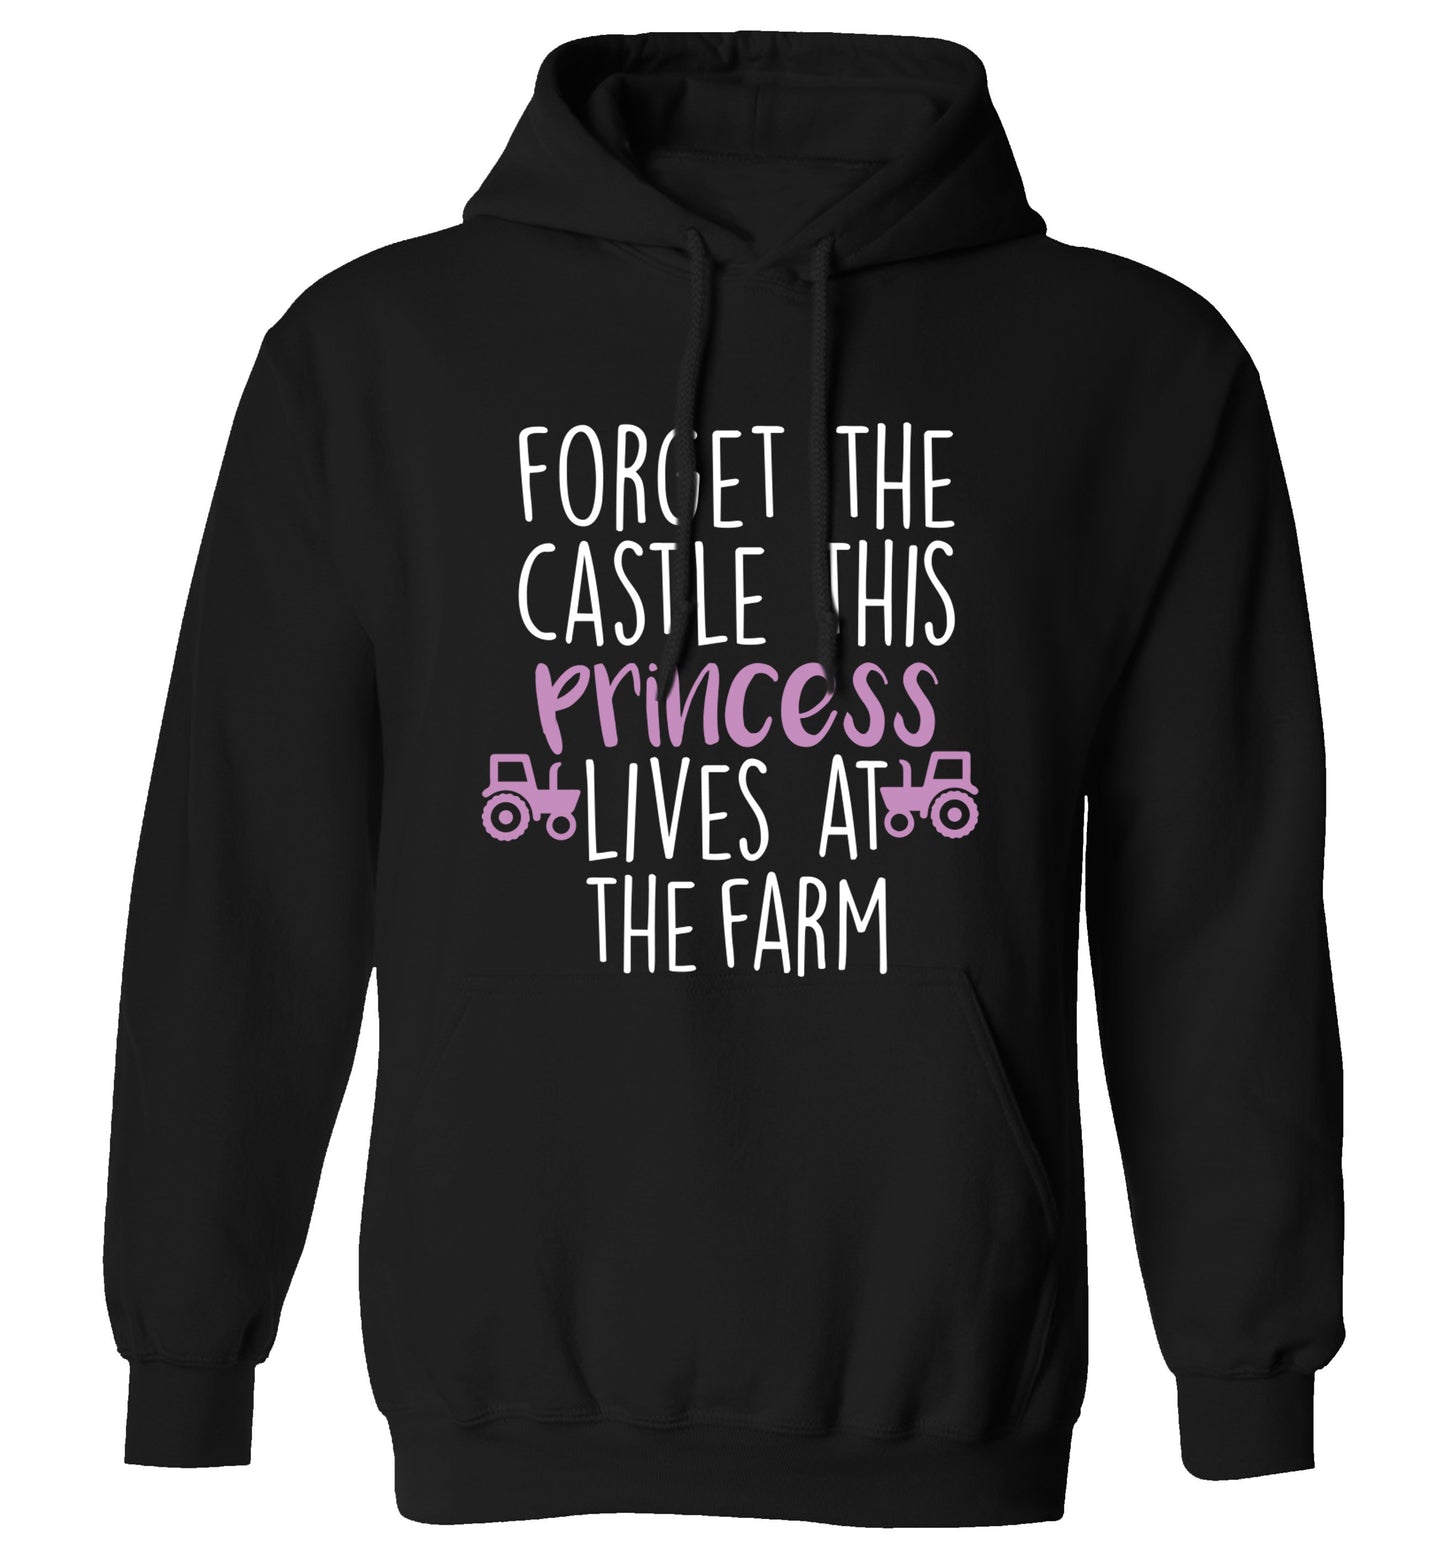 Forget the castle this princess lives at the farm adults unisex black hoodie 2XL